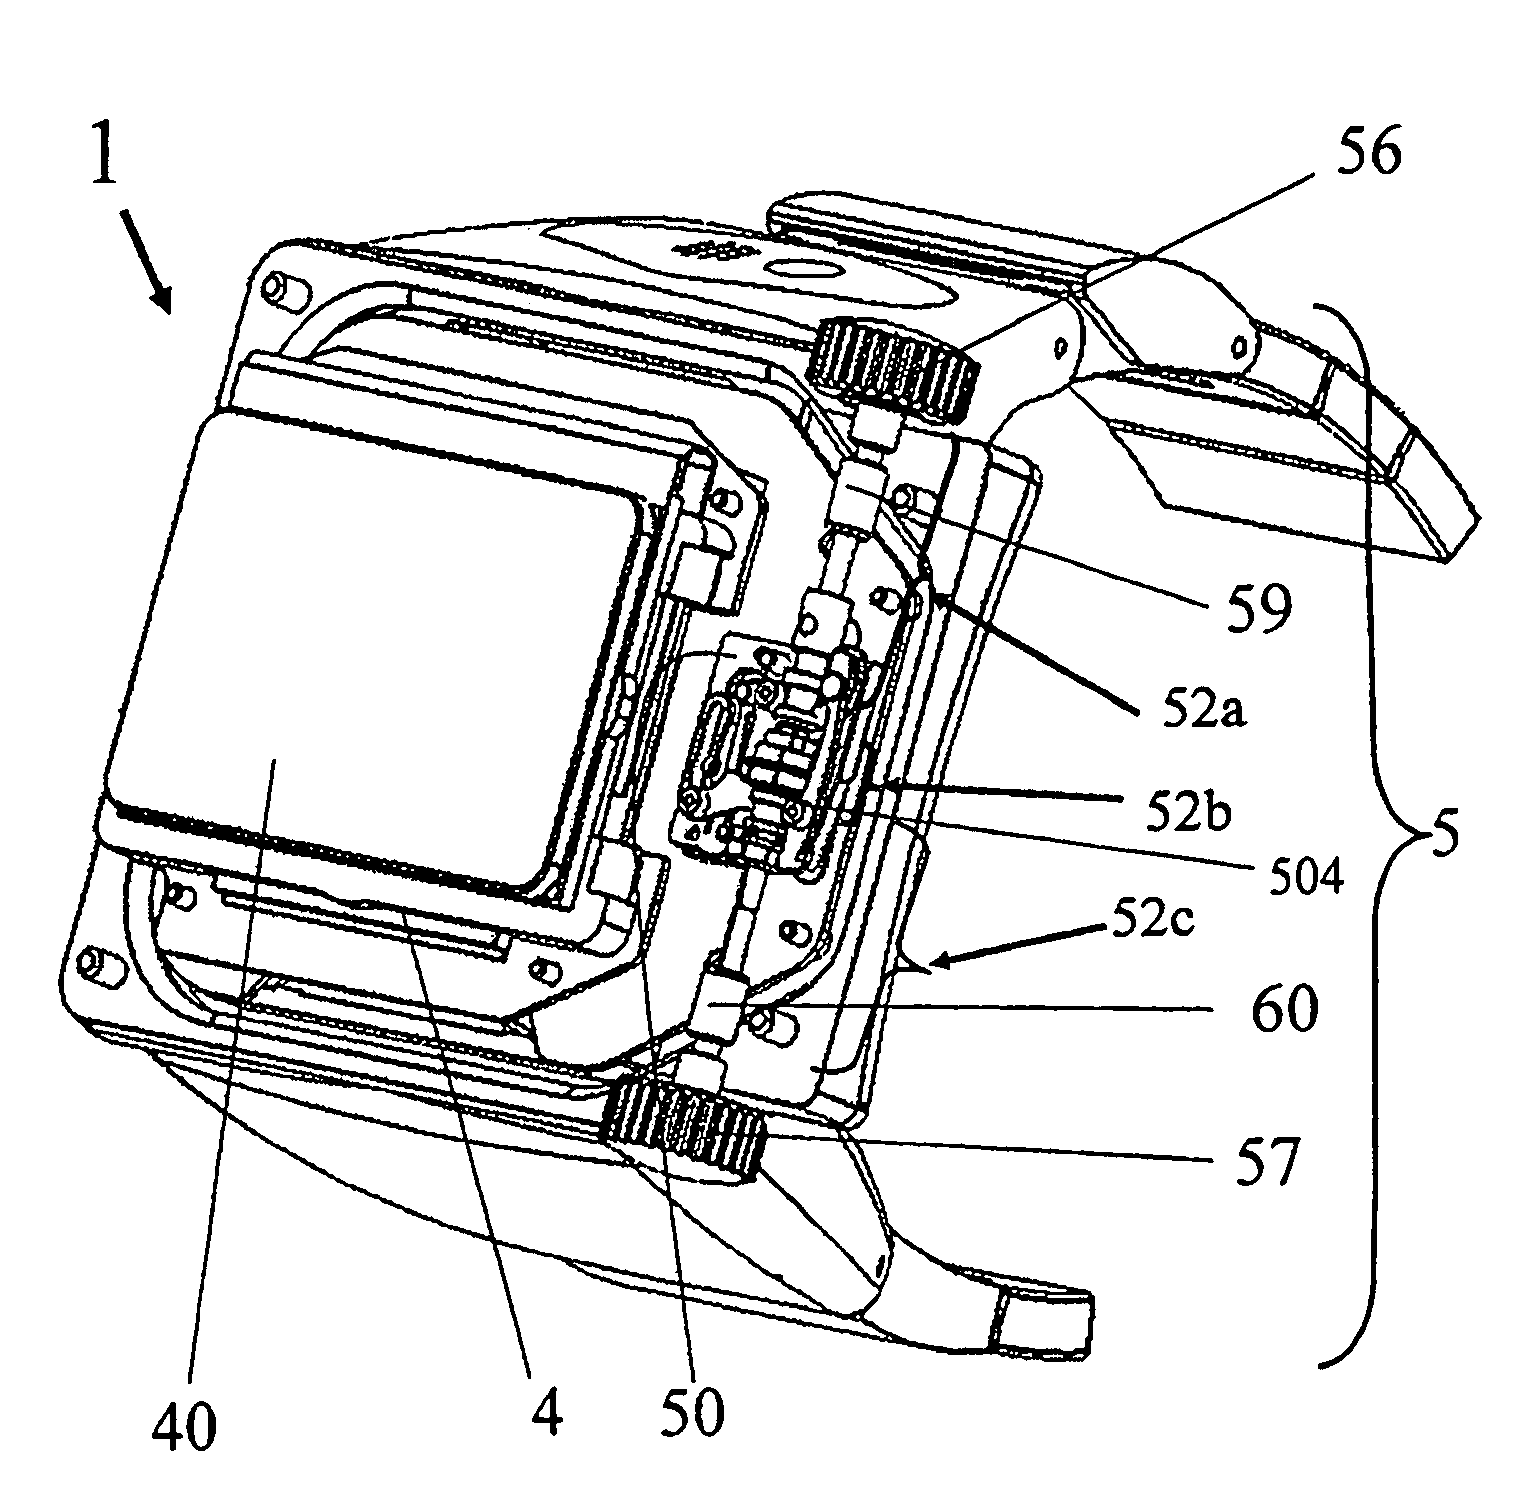 Device for operating an electronic multifunctional device